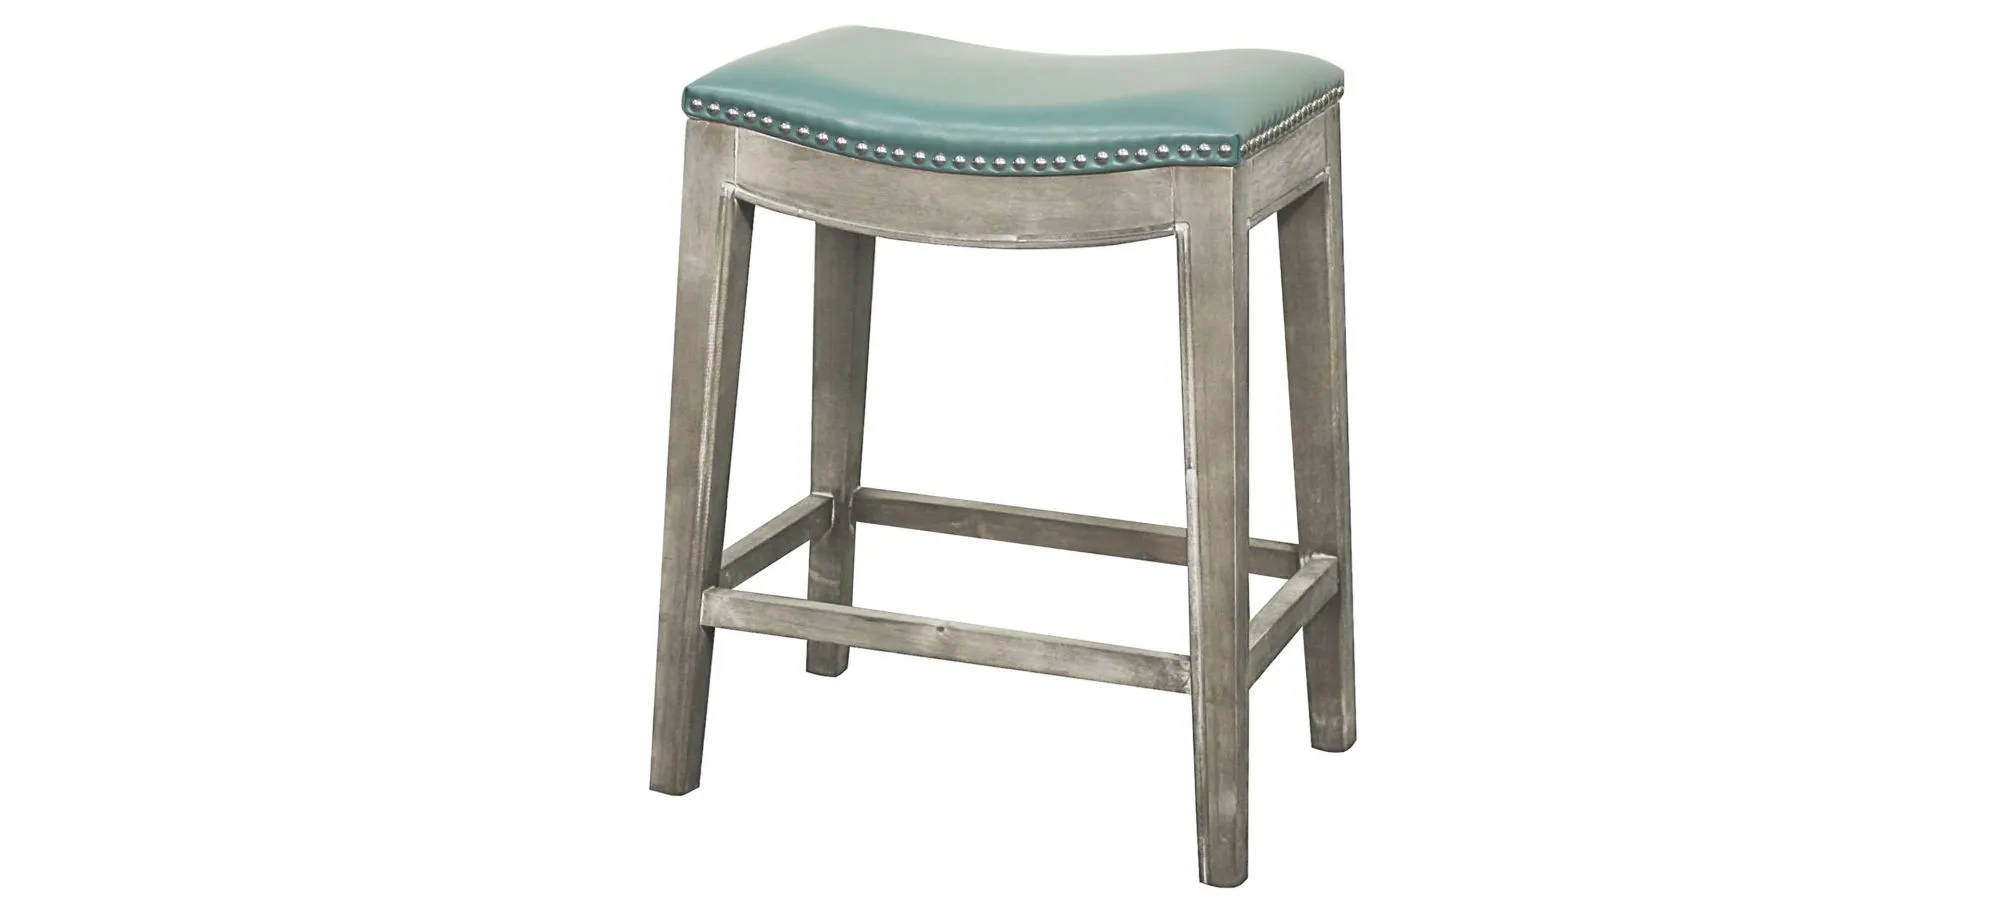 Elmo Counter Stool in Turquoise by New Pacific Direct